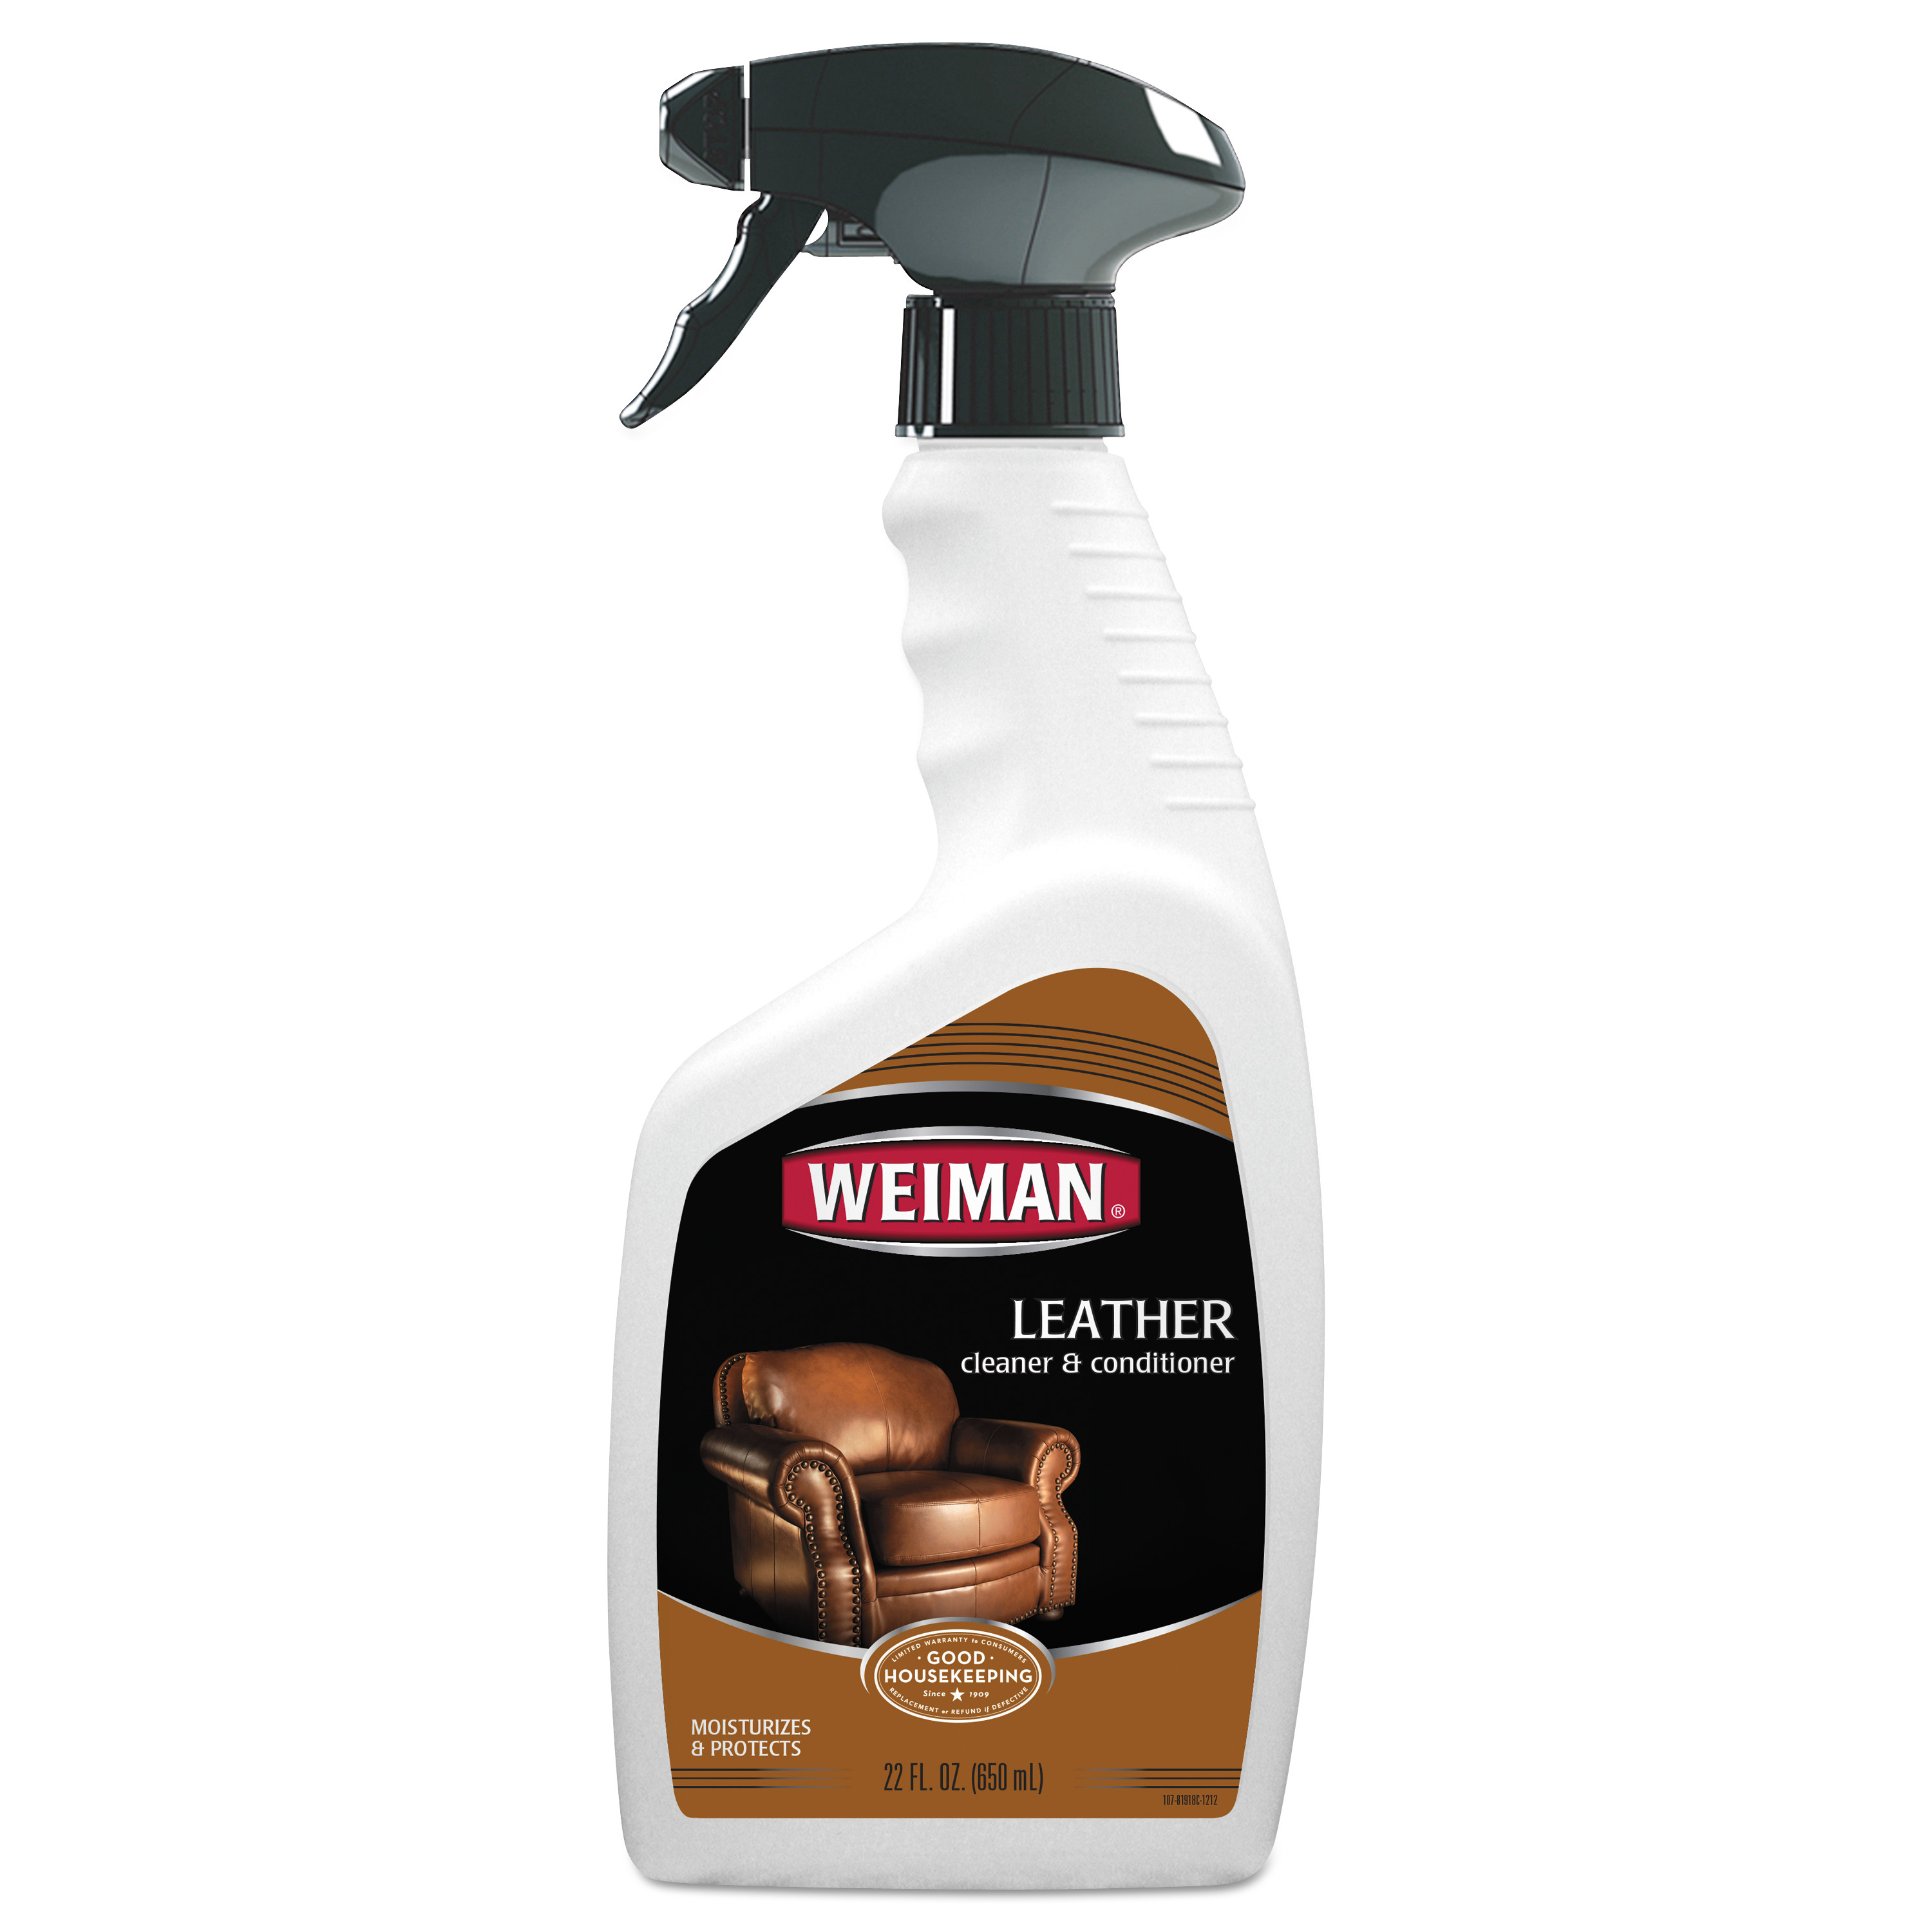  WEIMAN 107EA Leather Cleaner and Conditioner, Floral Scent, 22 oz Trigger Spray Bottle (WMN107EA) 